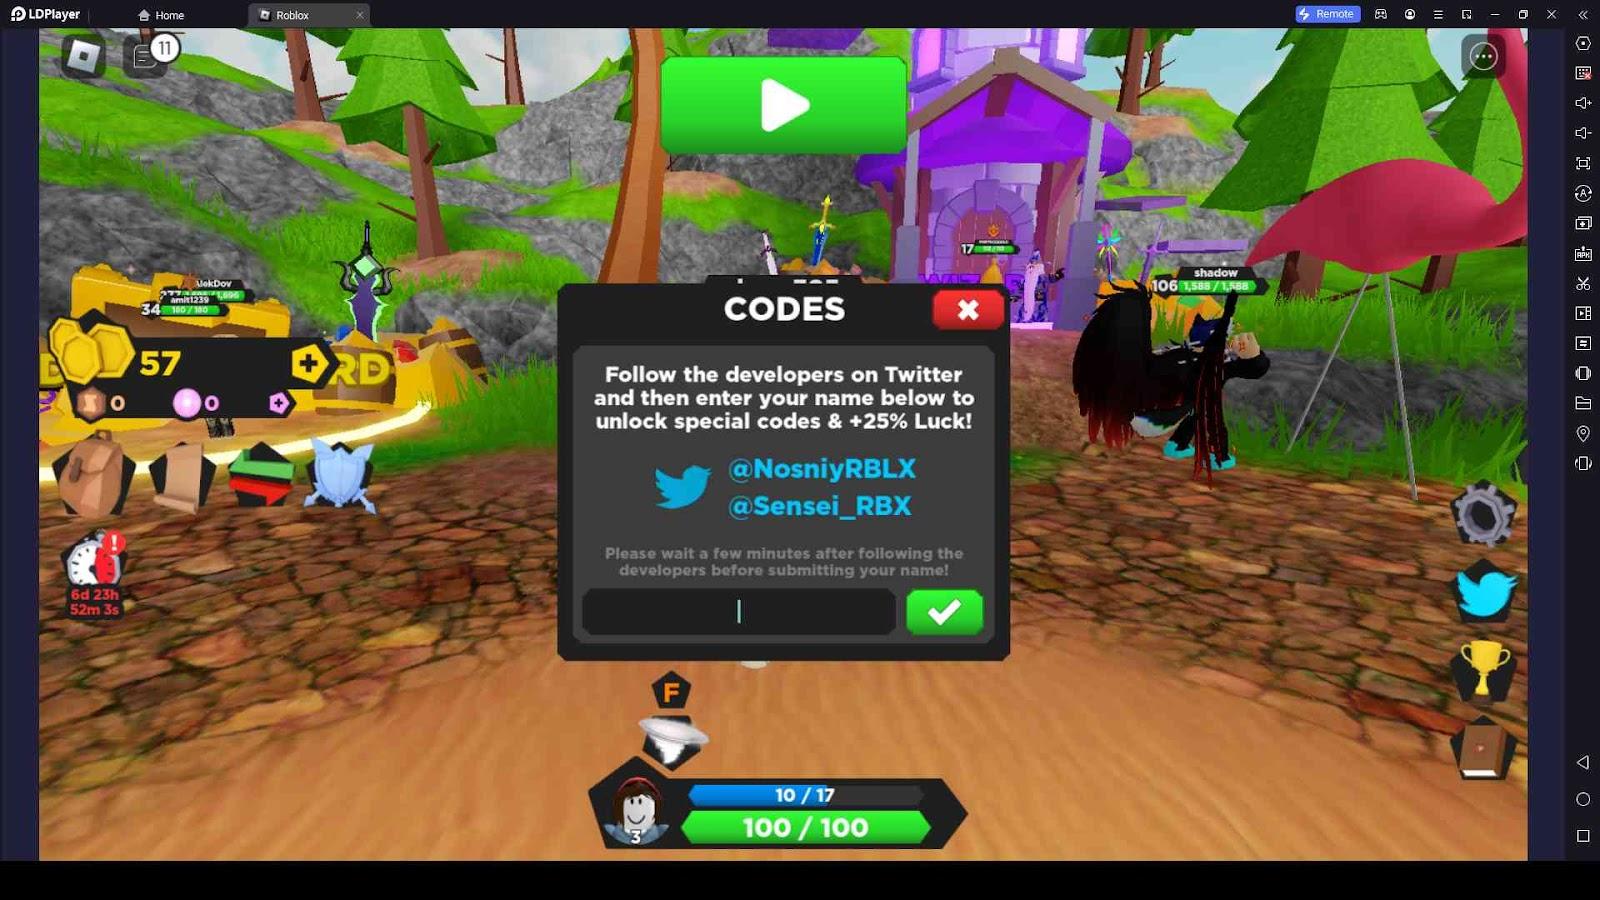 Roblox Treasure Quest codes (July 2022) – How to get free Potions and Gold  - Dexerto